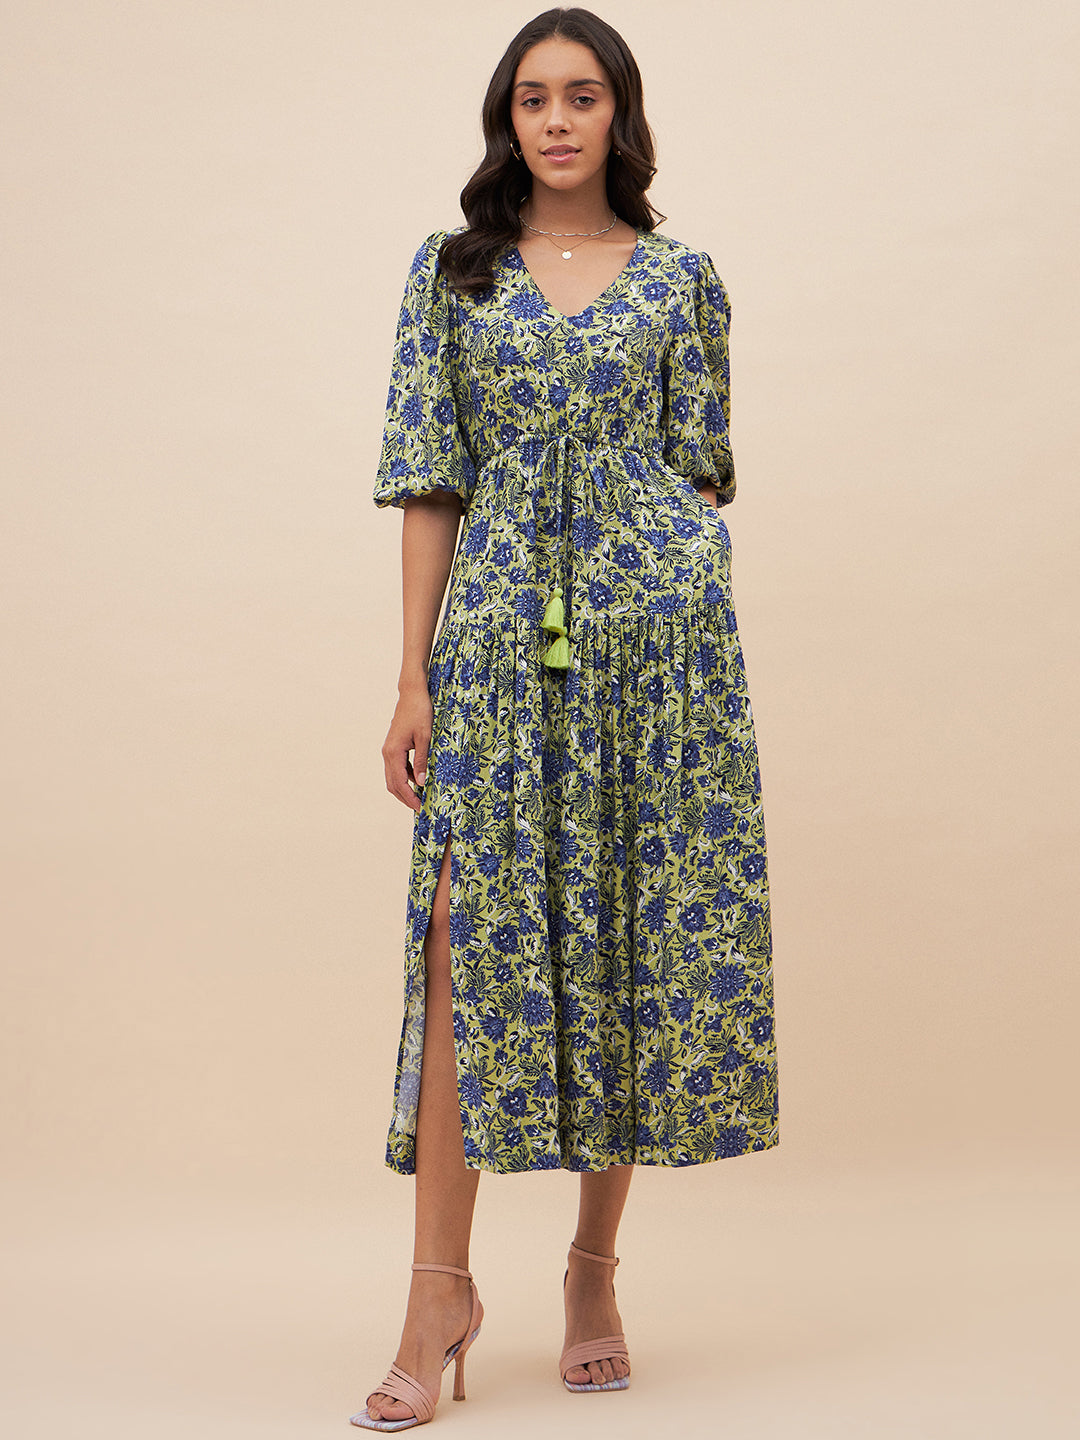 Blue And Green Floral Slit Maxi Dress